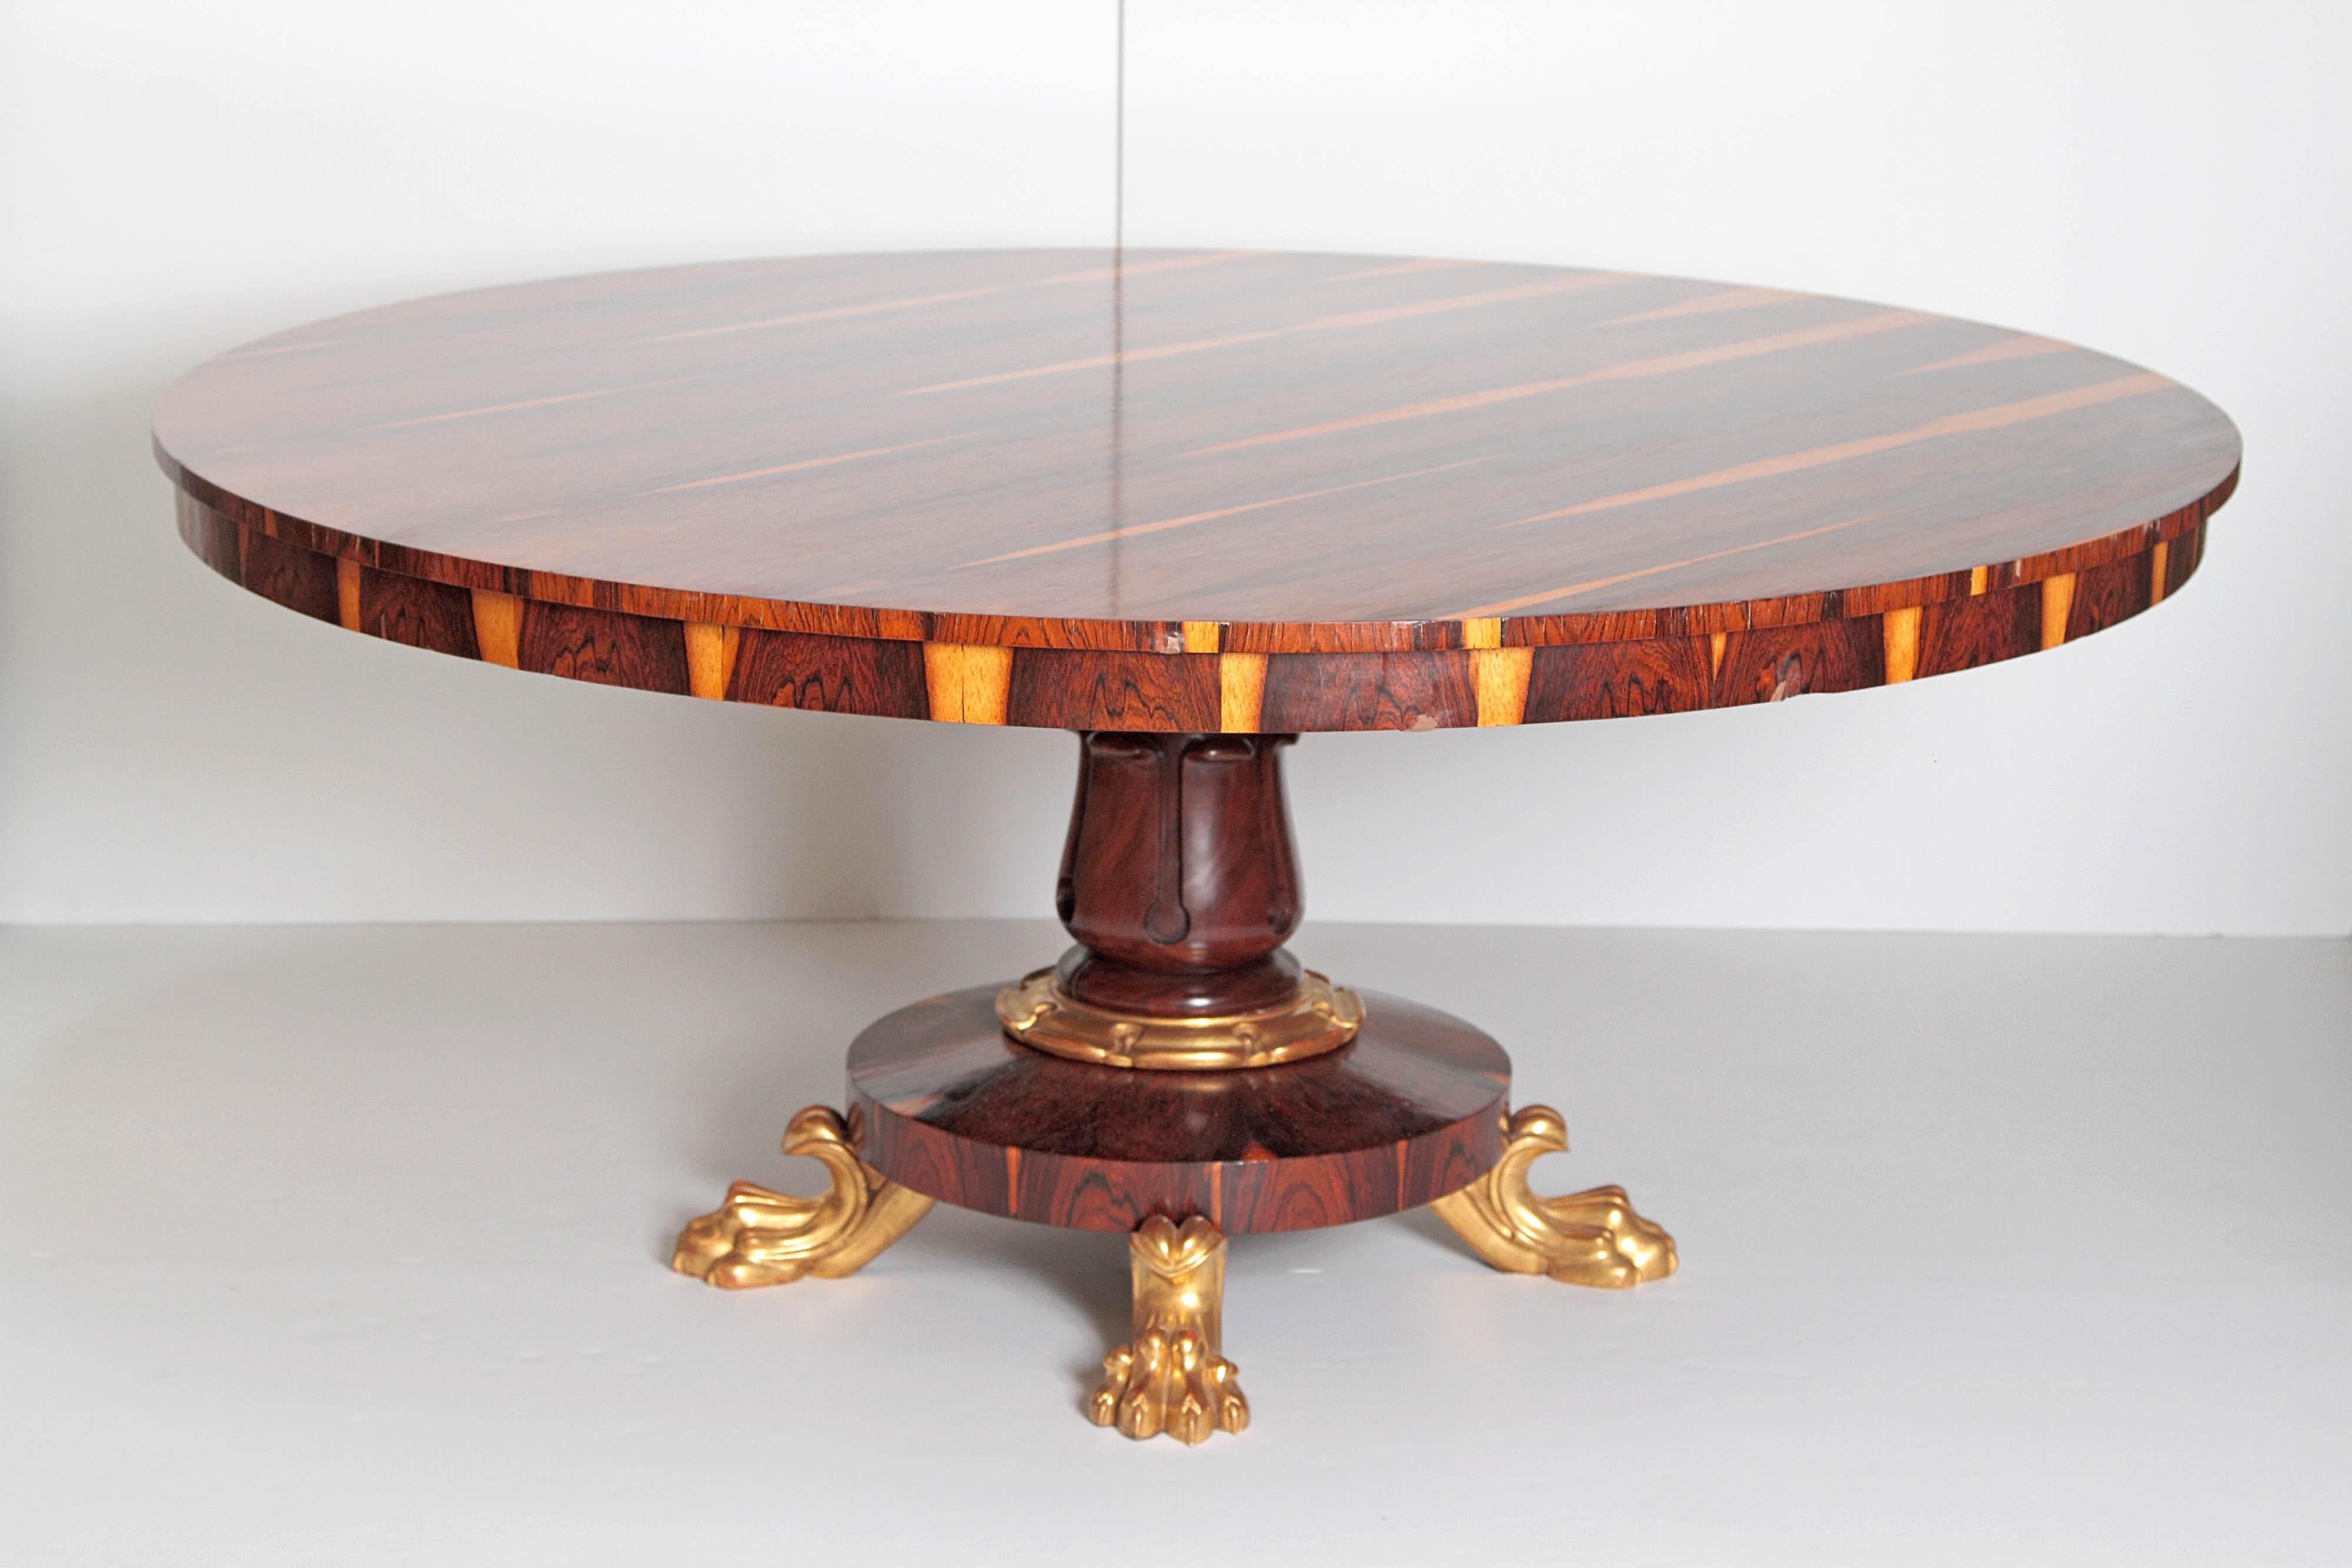 Hand-Carved Period English Regency Centre Table of Exotic Calamander